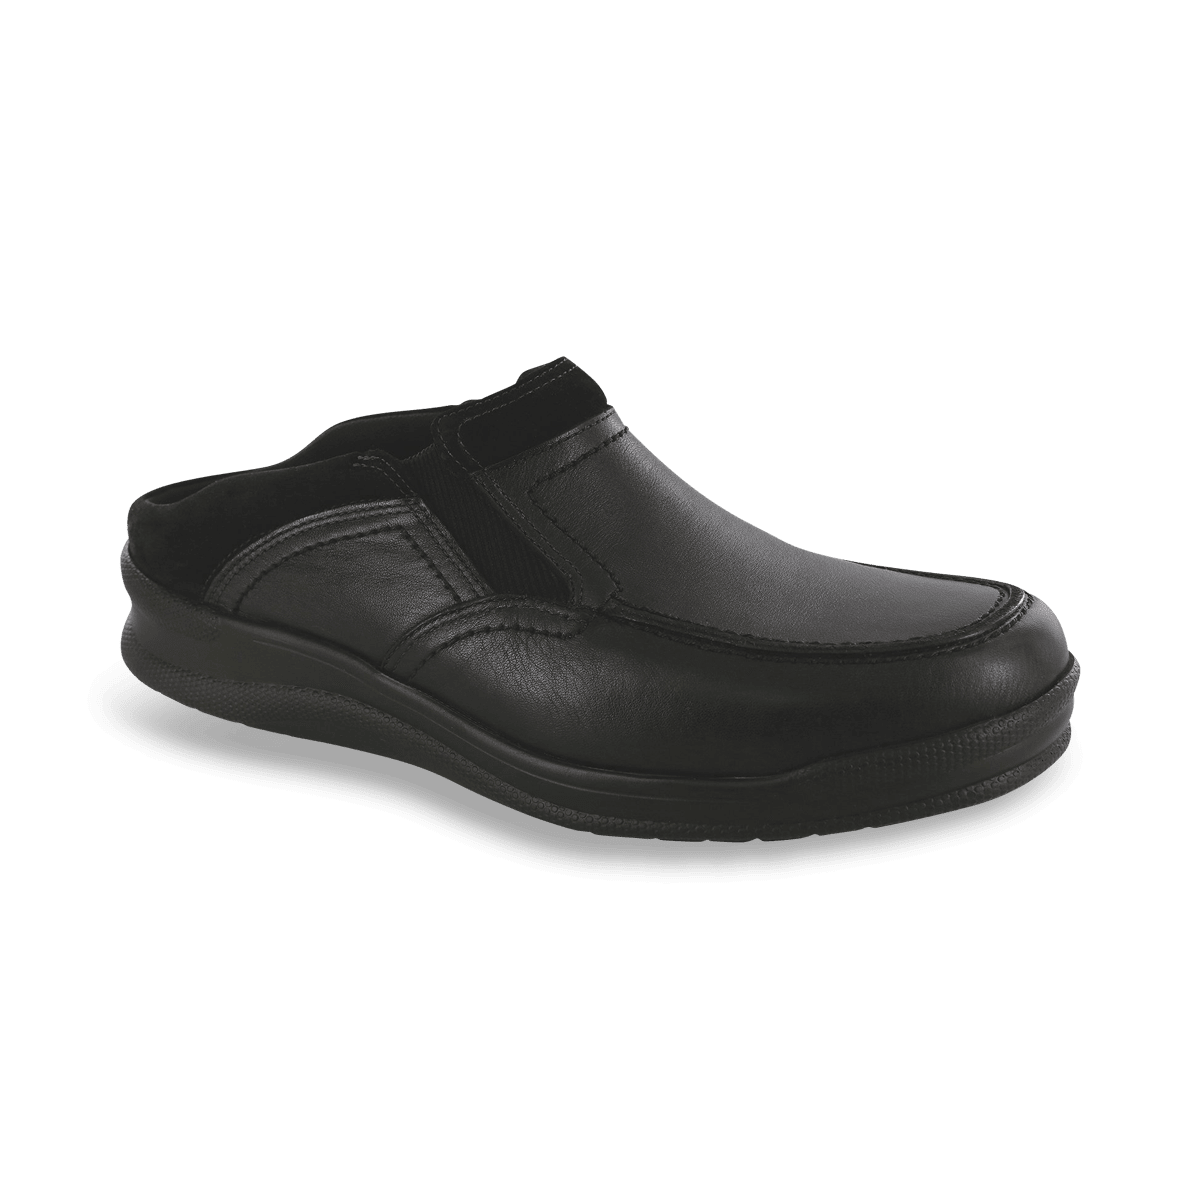 SAS Womens Me Too Leather Low Top Walking Shoes, Black, Size 7.0 : Buy  Online at Best Price in KSA - Souq is now Amazon.sa: Fashion